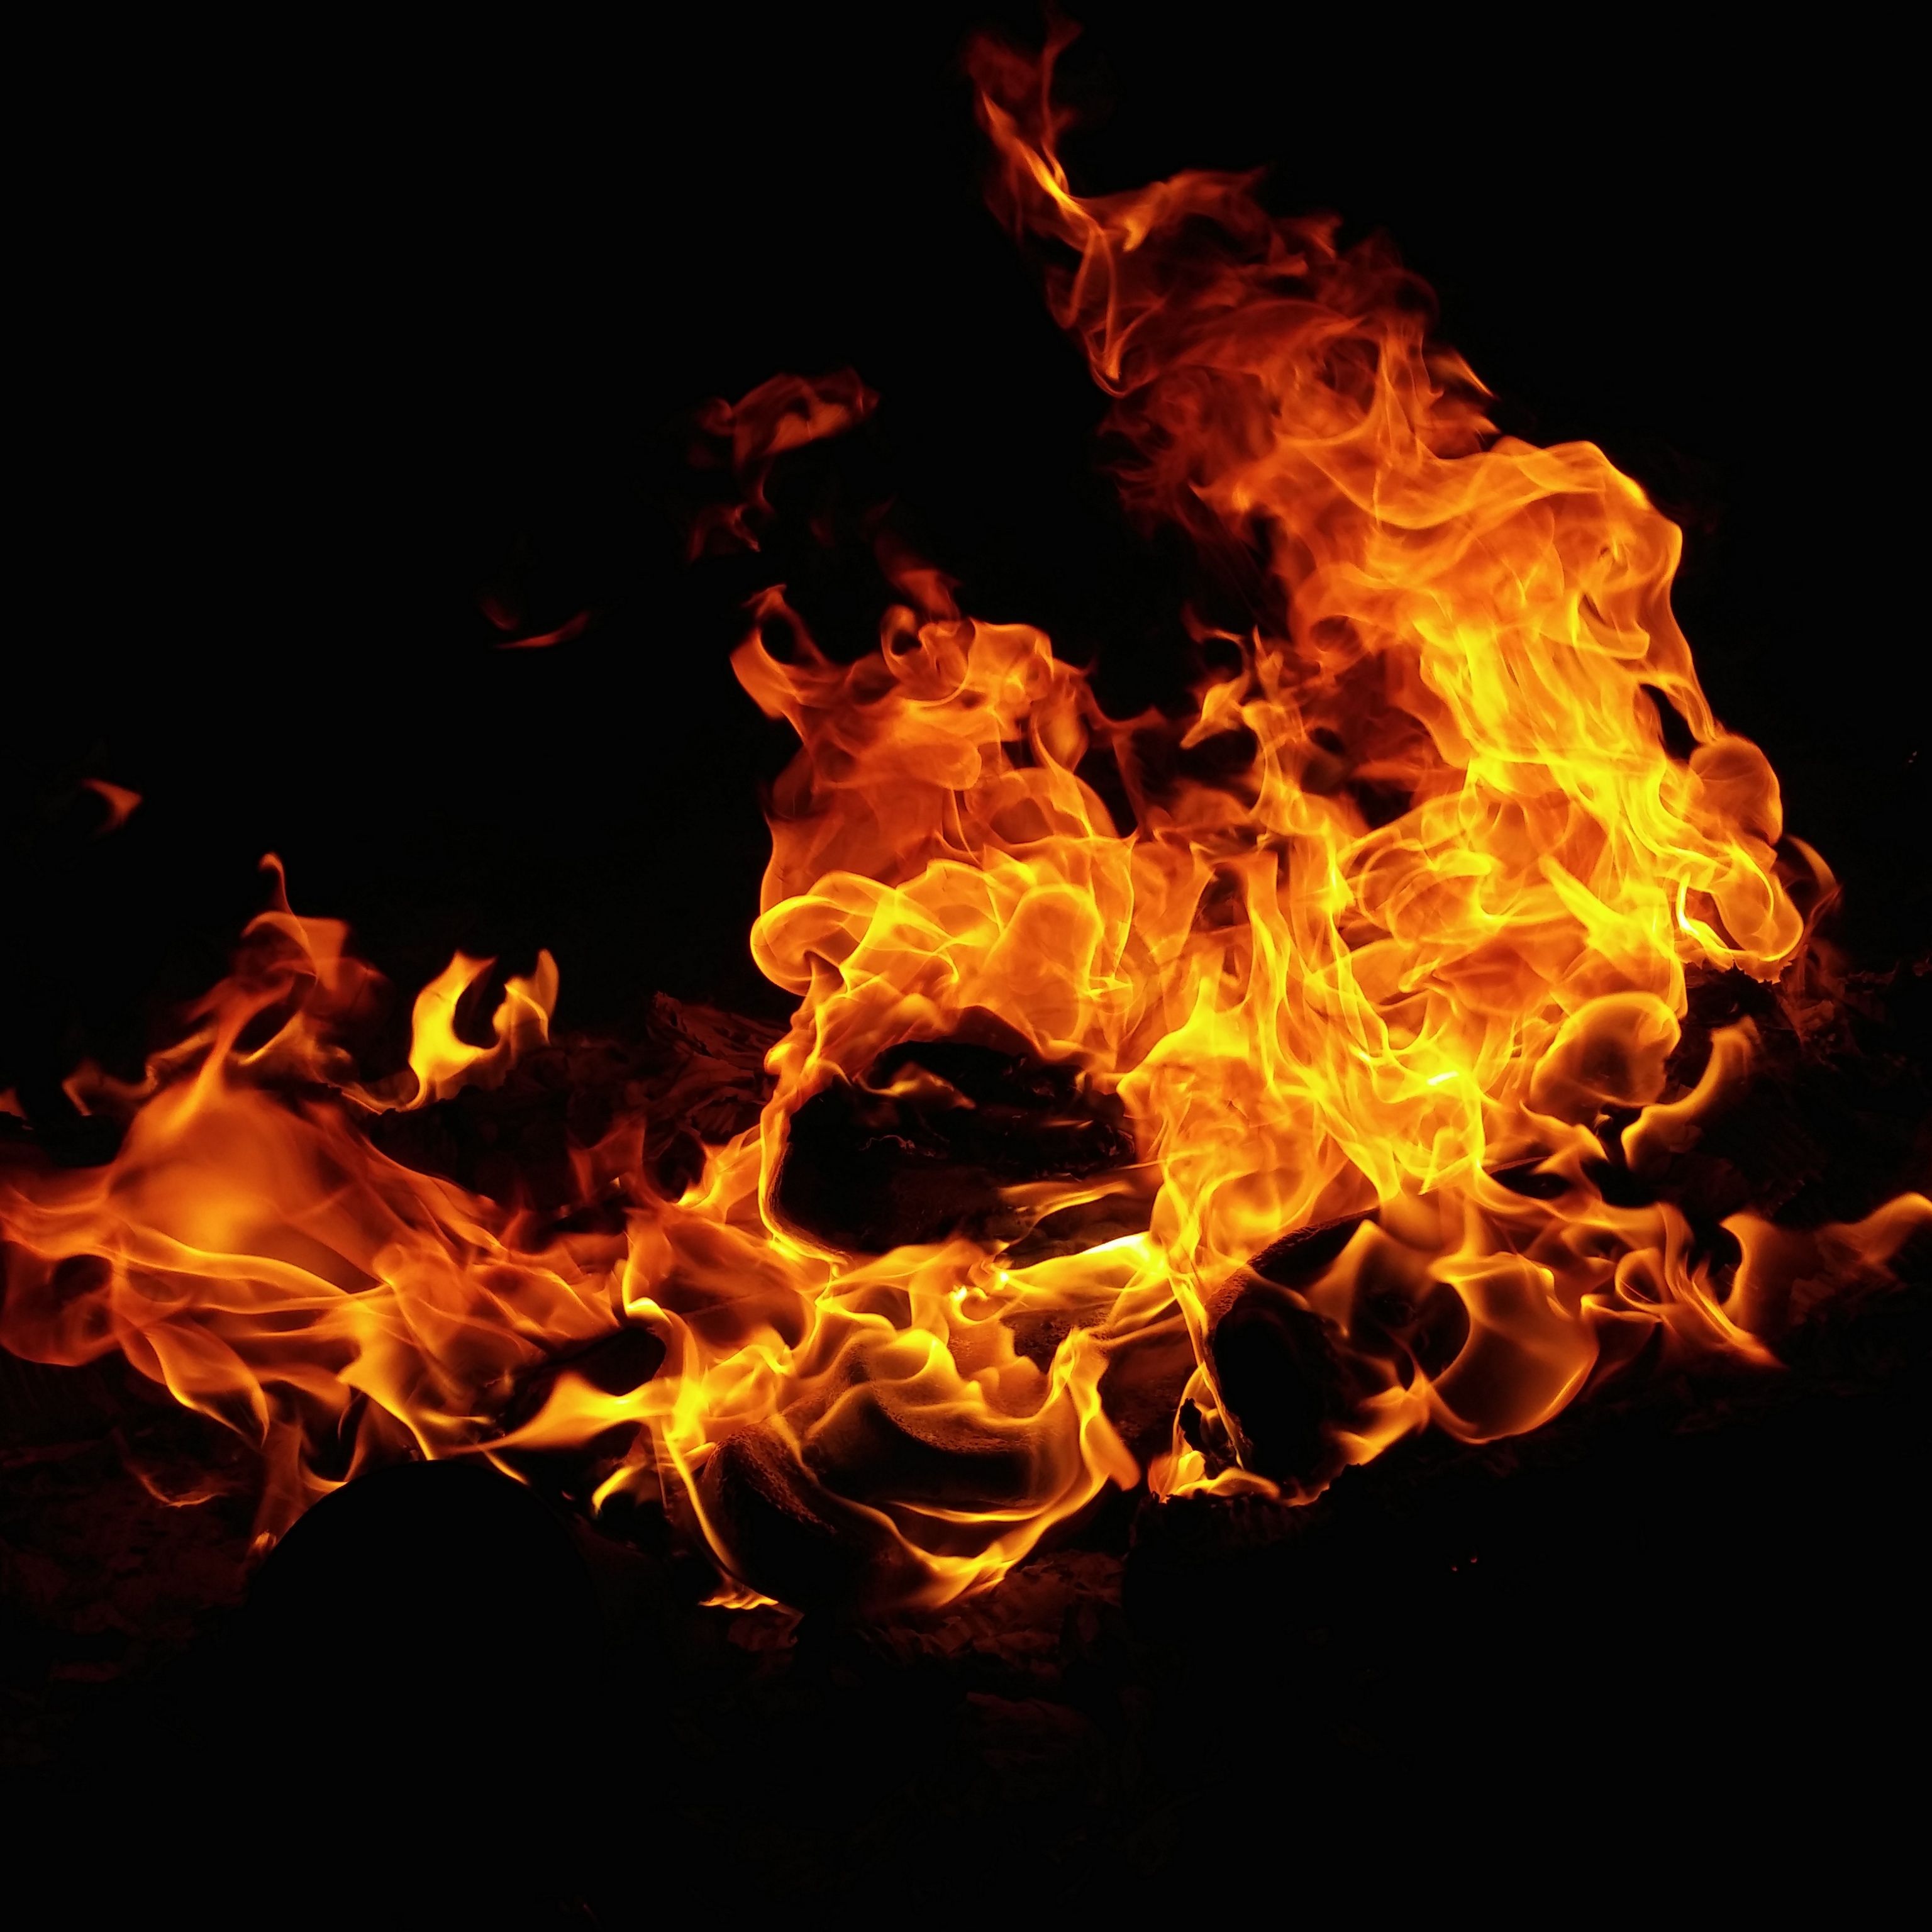 Photograph of a Burning Fire · Free